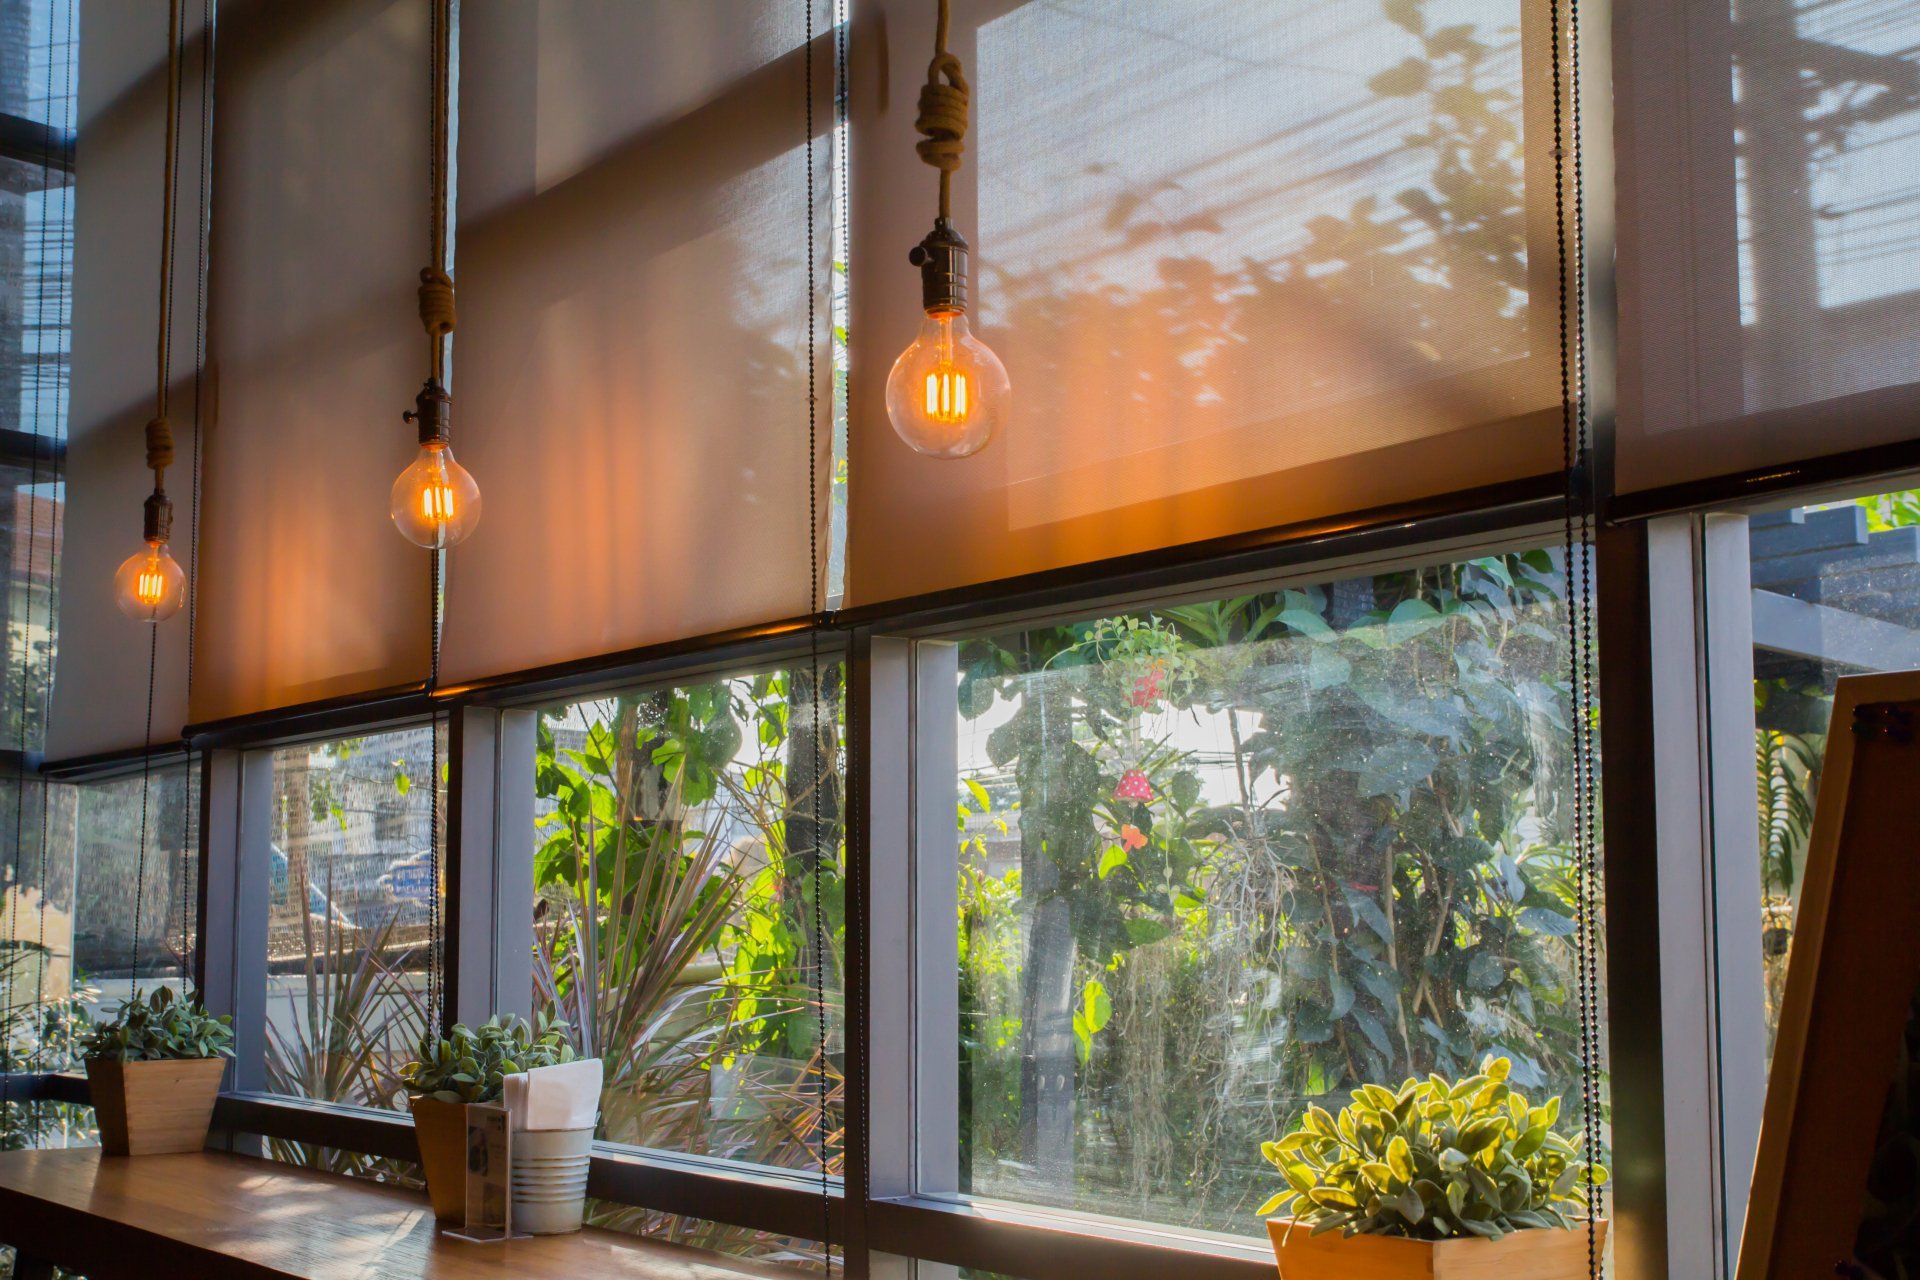 roll blinds to protect sunlight and lighting to decorate the coffee shop.